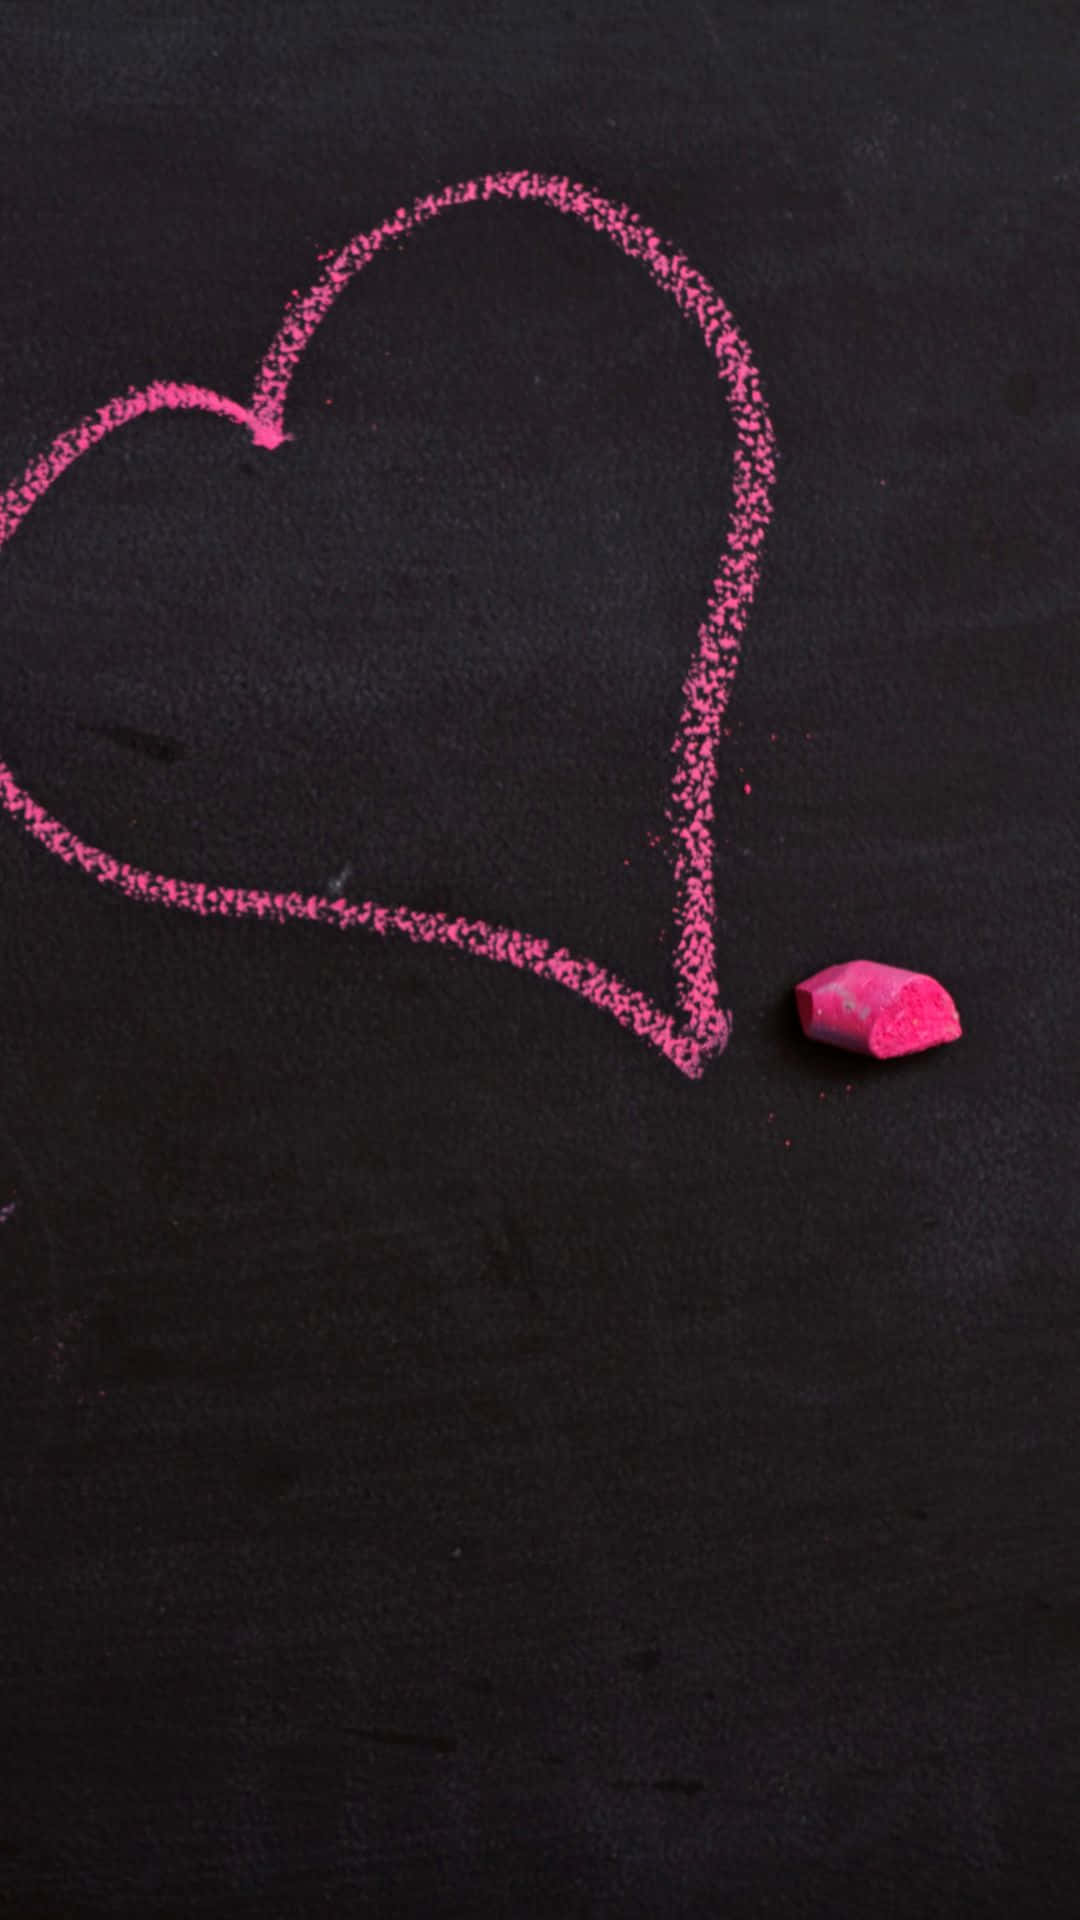 Chalk Heart Drawing Black And Pink Iphone Wallpaper